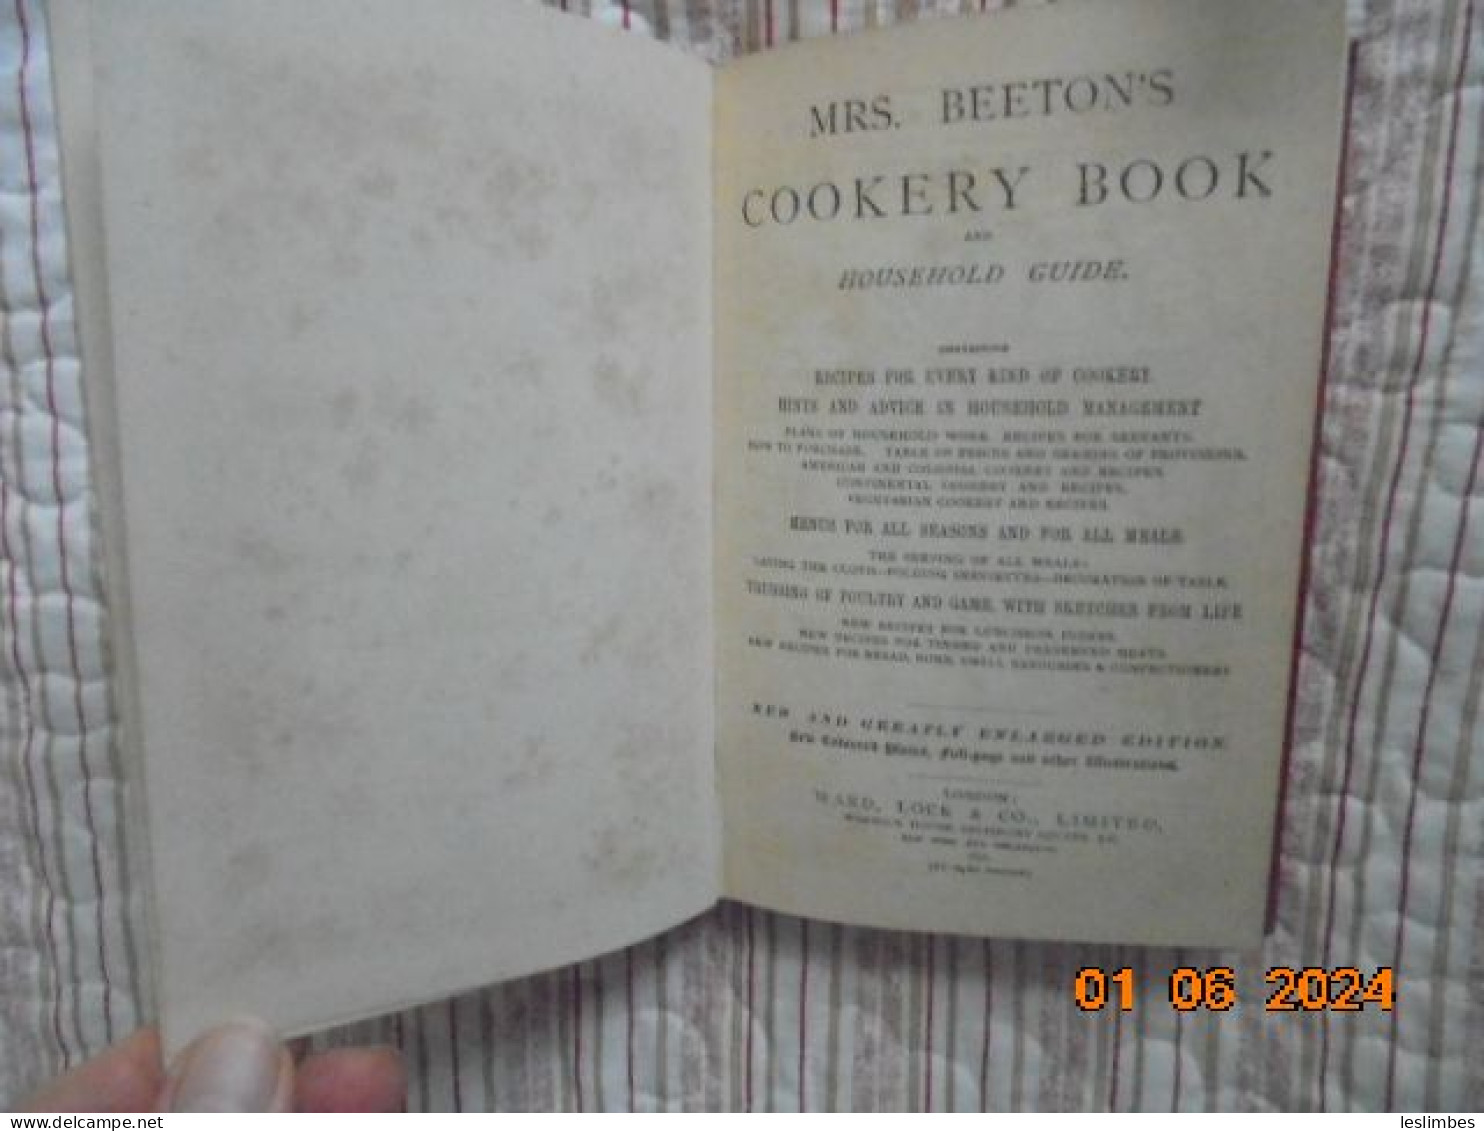 Mrs Beeton's Cookery Book And Household Guide. 1898 New & Enlarged Edition. 516 Columns, 1000 Receipts And Instructions - Cuisine Générale